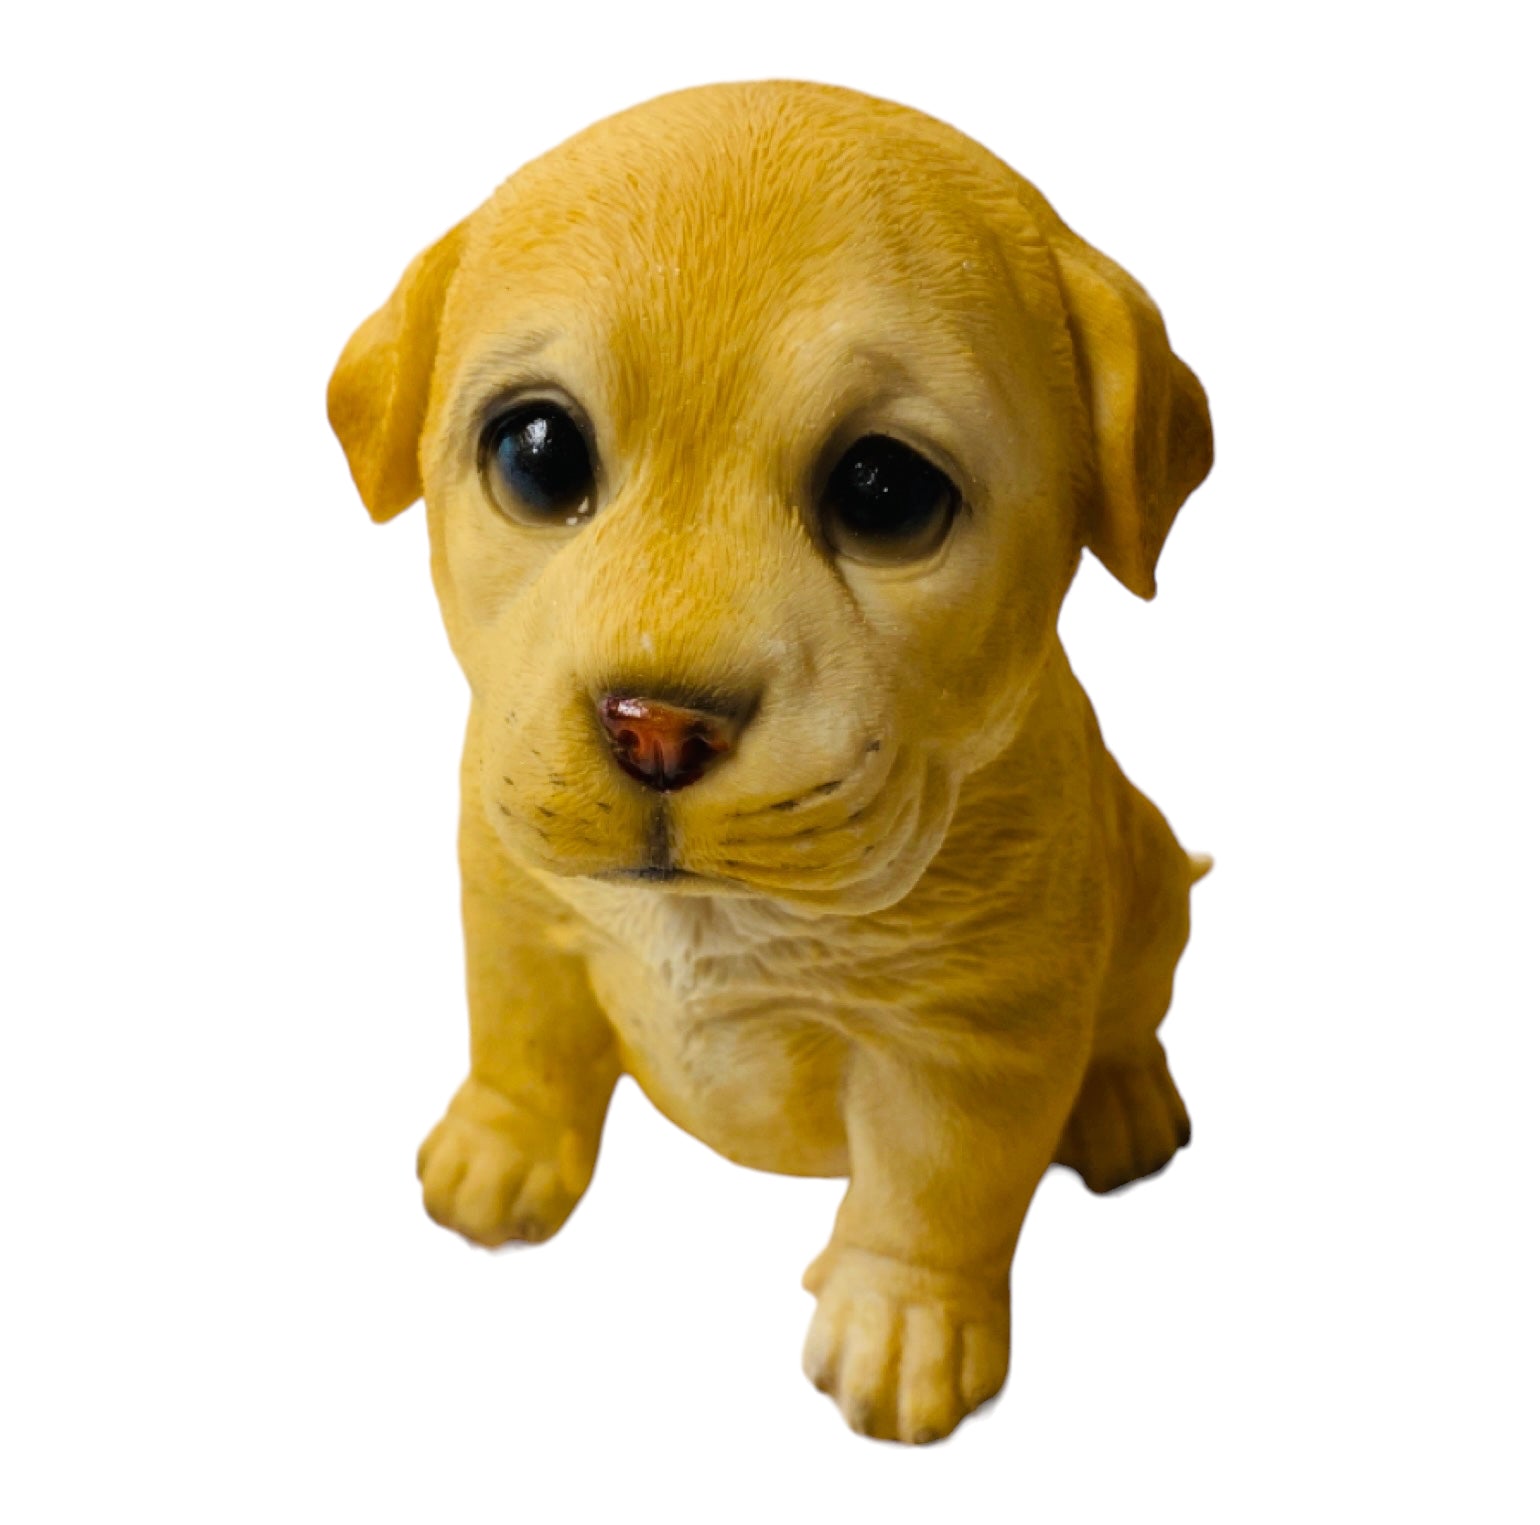 Dog Puppy Golden Labrador Ornament - The Renmy Store Homewares & Gifts 